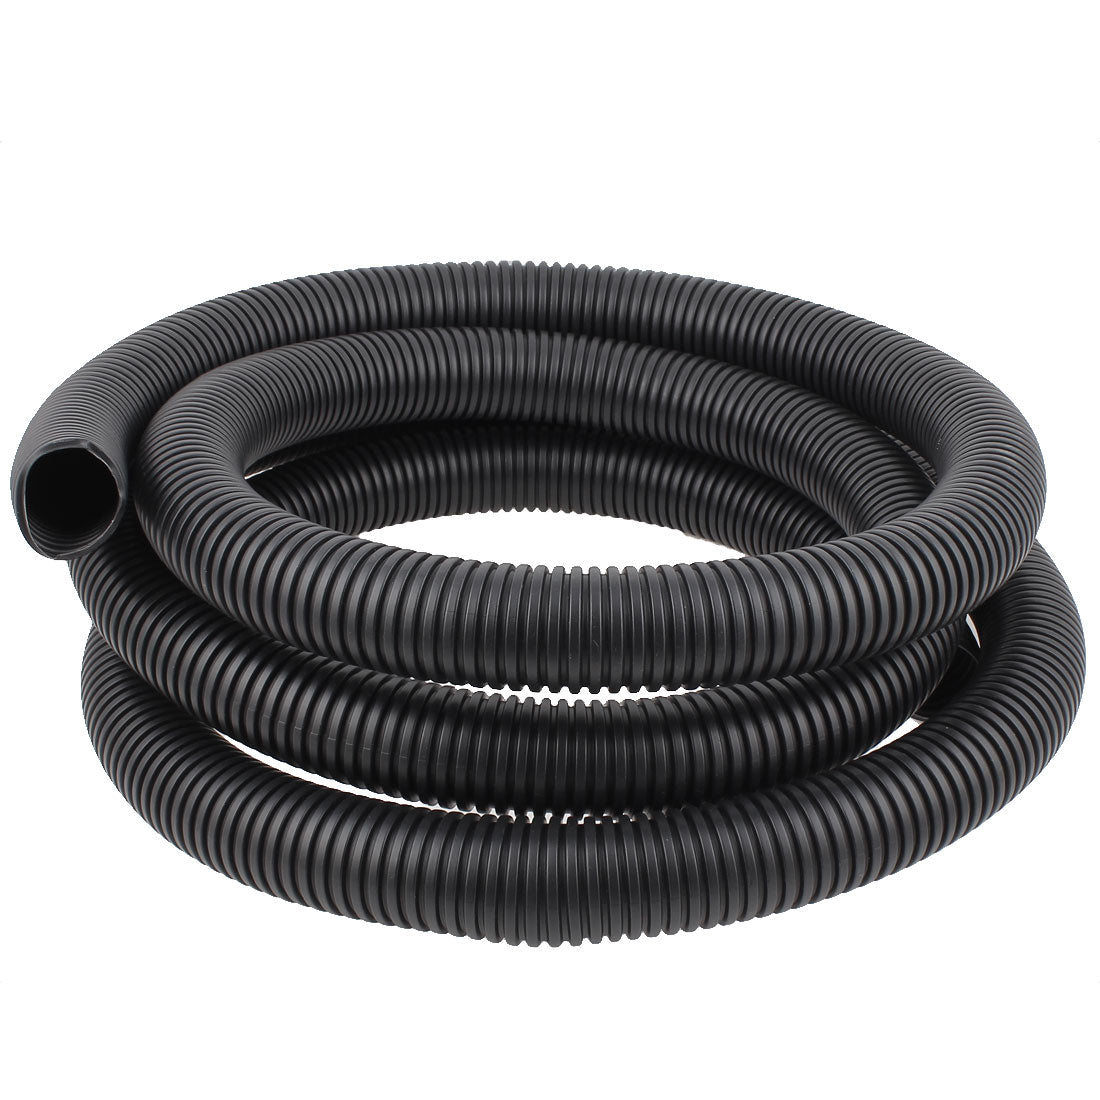 uxcell Uxcell 4 M 35 x 42 mm Plastic Flexible Corrugated Conduit Tube for Garden,Office Black